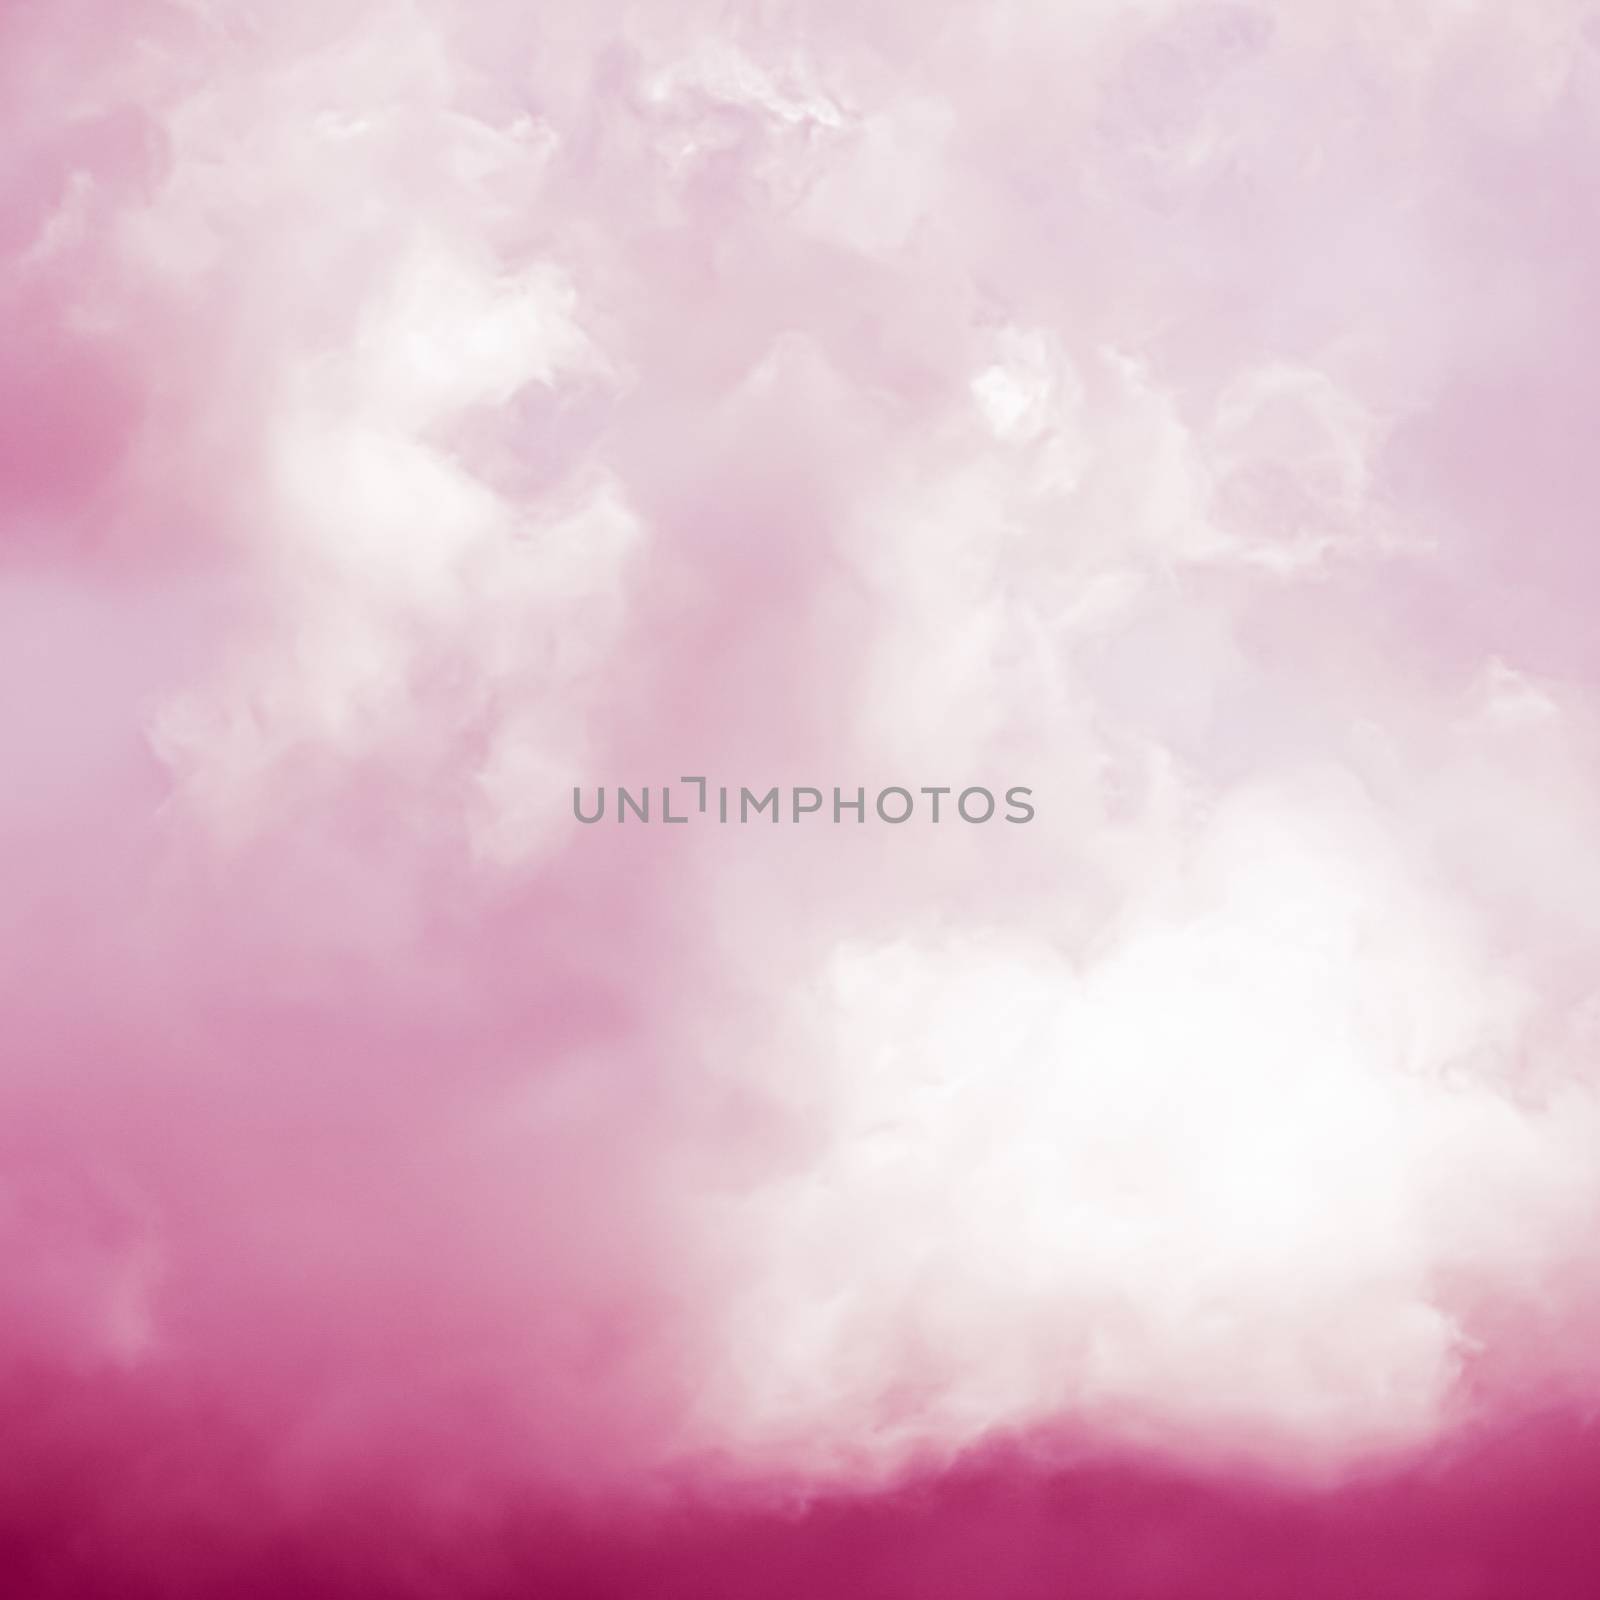 Fantasy and dreamy pink sky, spiritual and nature background by Anneleven